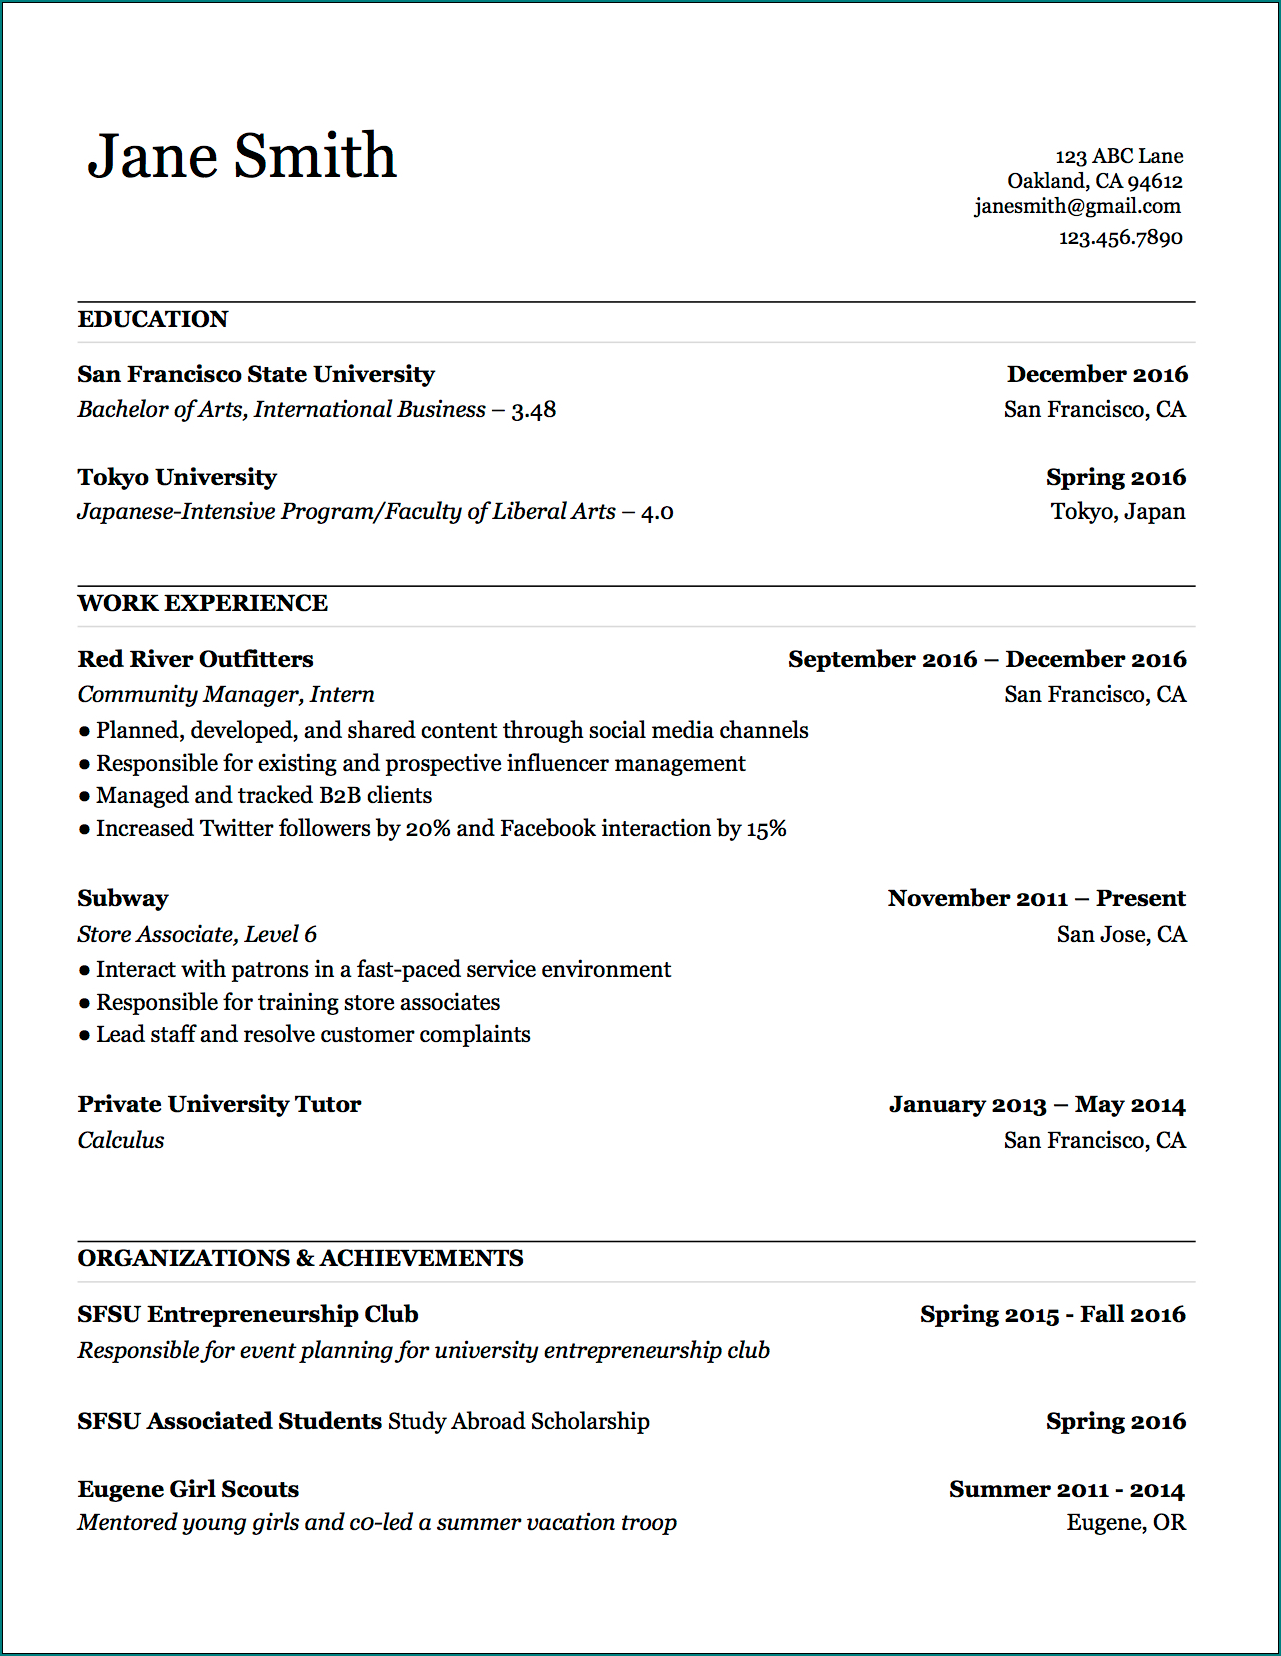 Example of Basic Resume Template